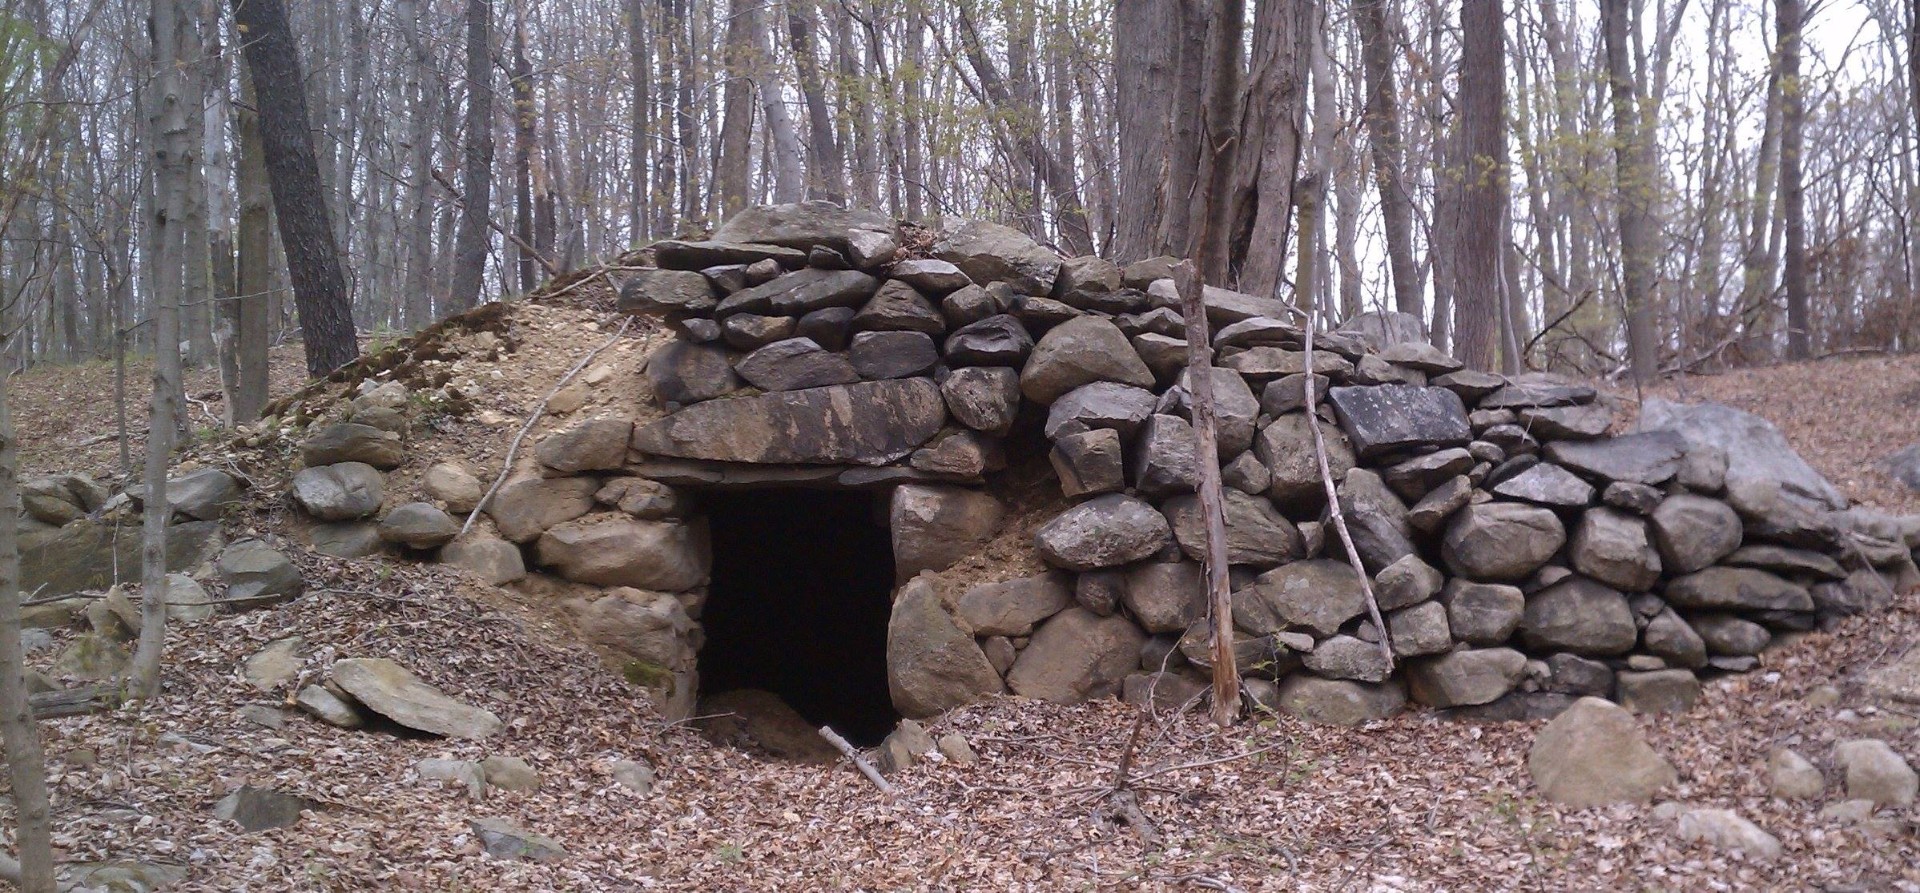 From the town of Kent (the stone chamber capital of the US for towns), near the Middle Branch of the Croton River